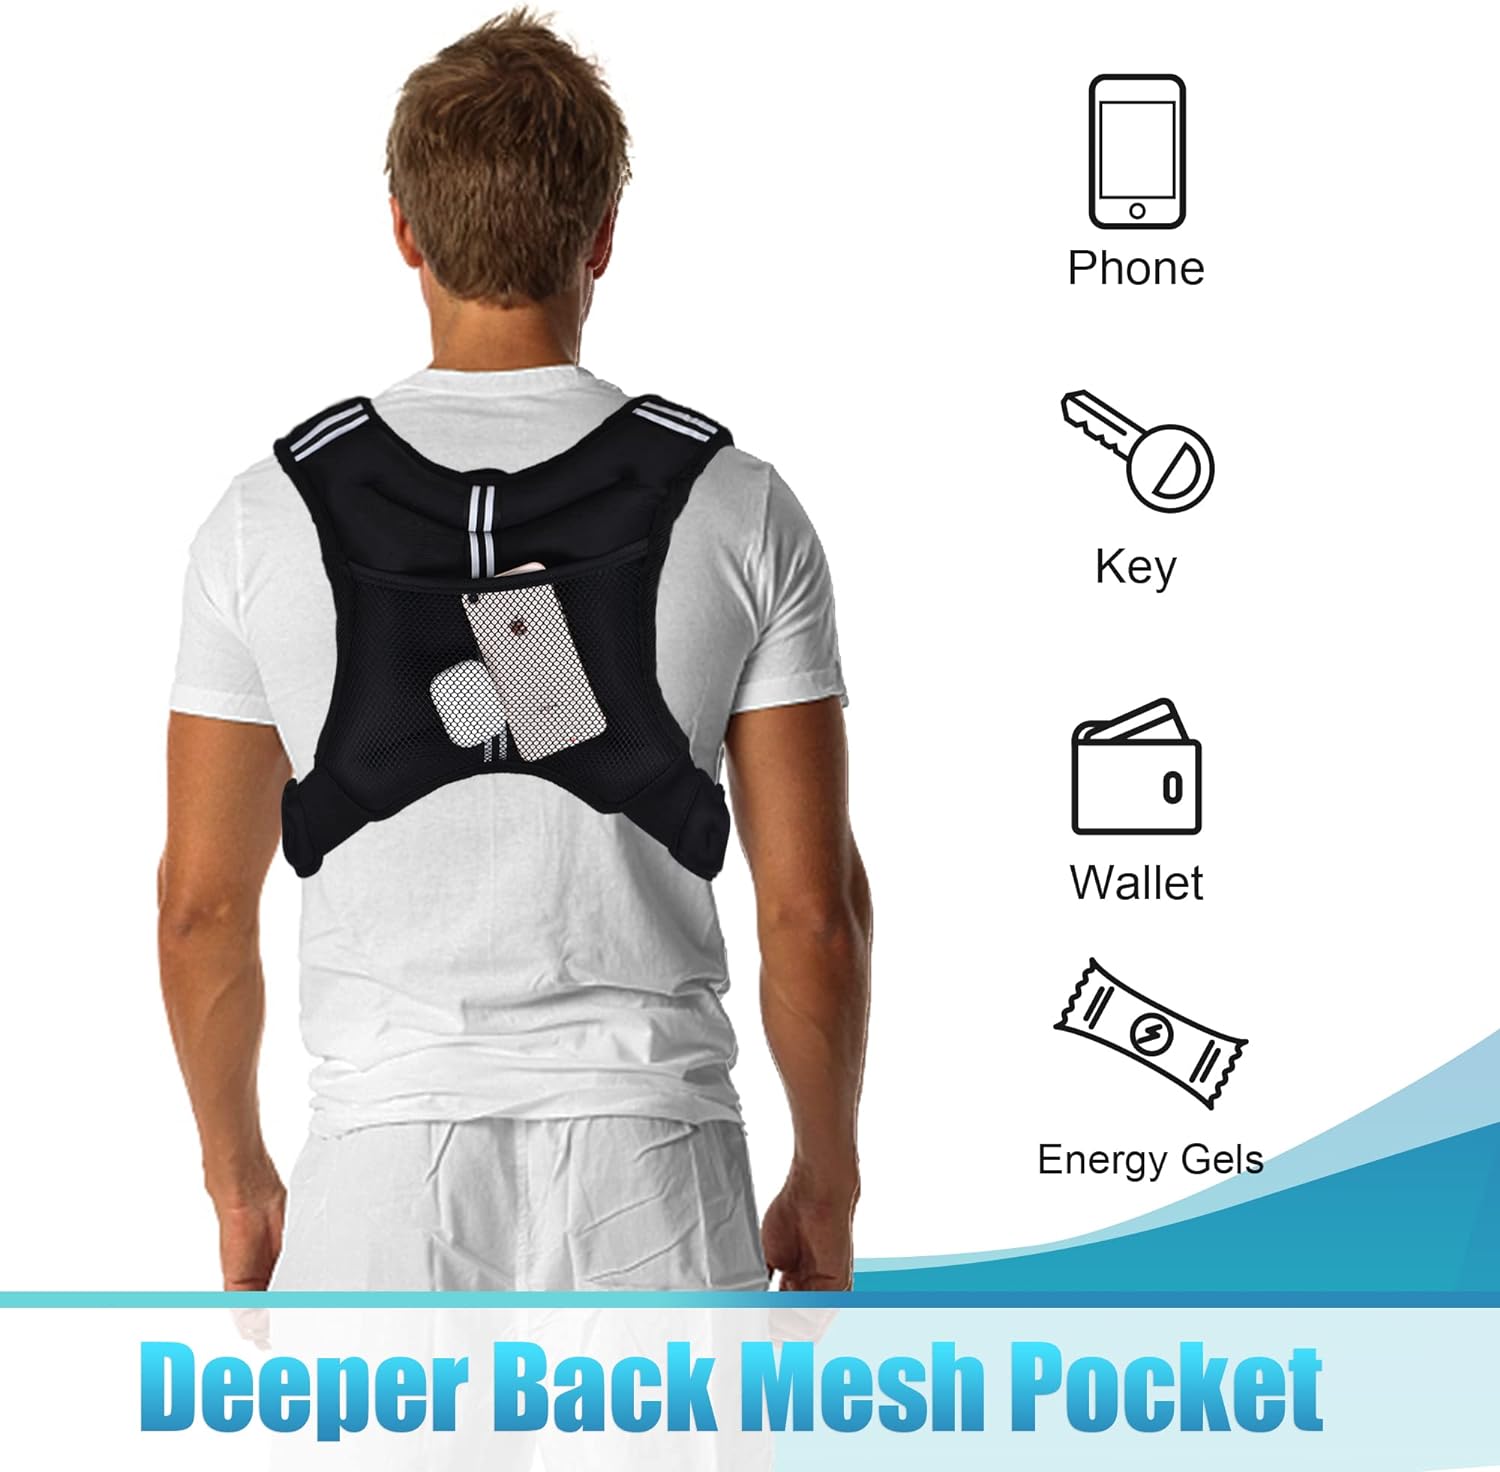 Weighted Vest with Ankle/Wrist